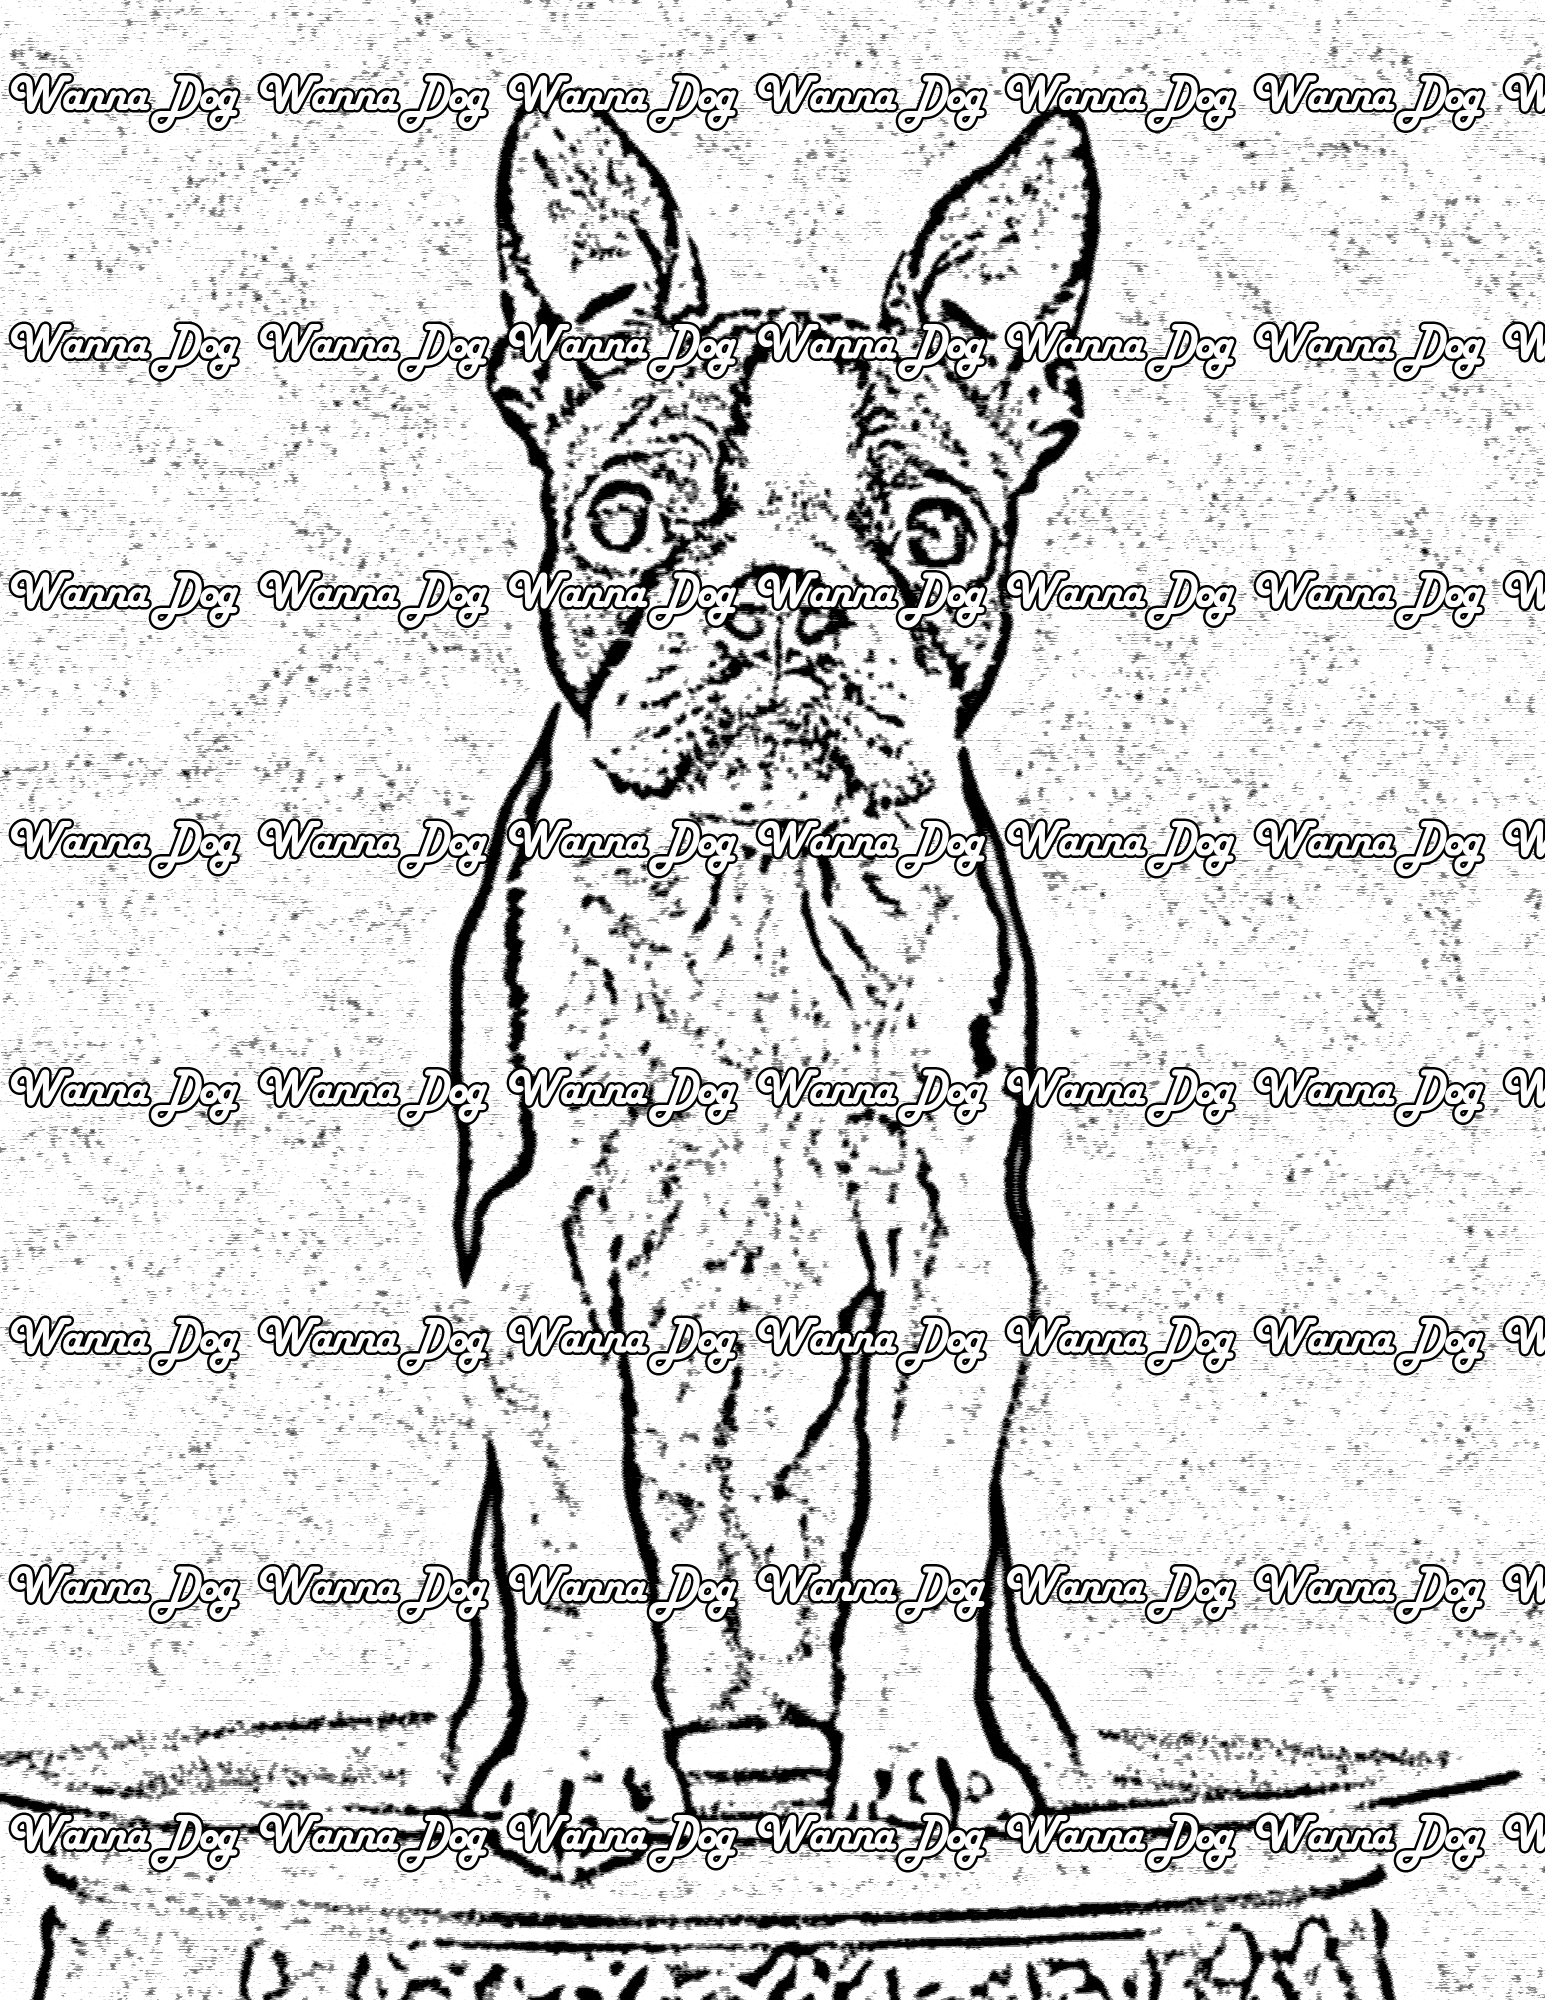 Boston Terrier Coloring Page of a Boston Terrier posing